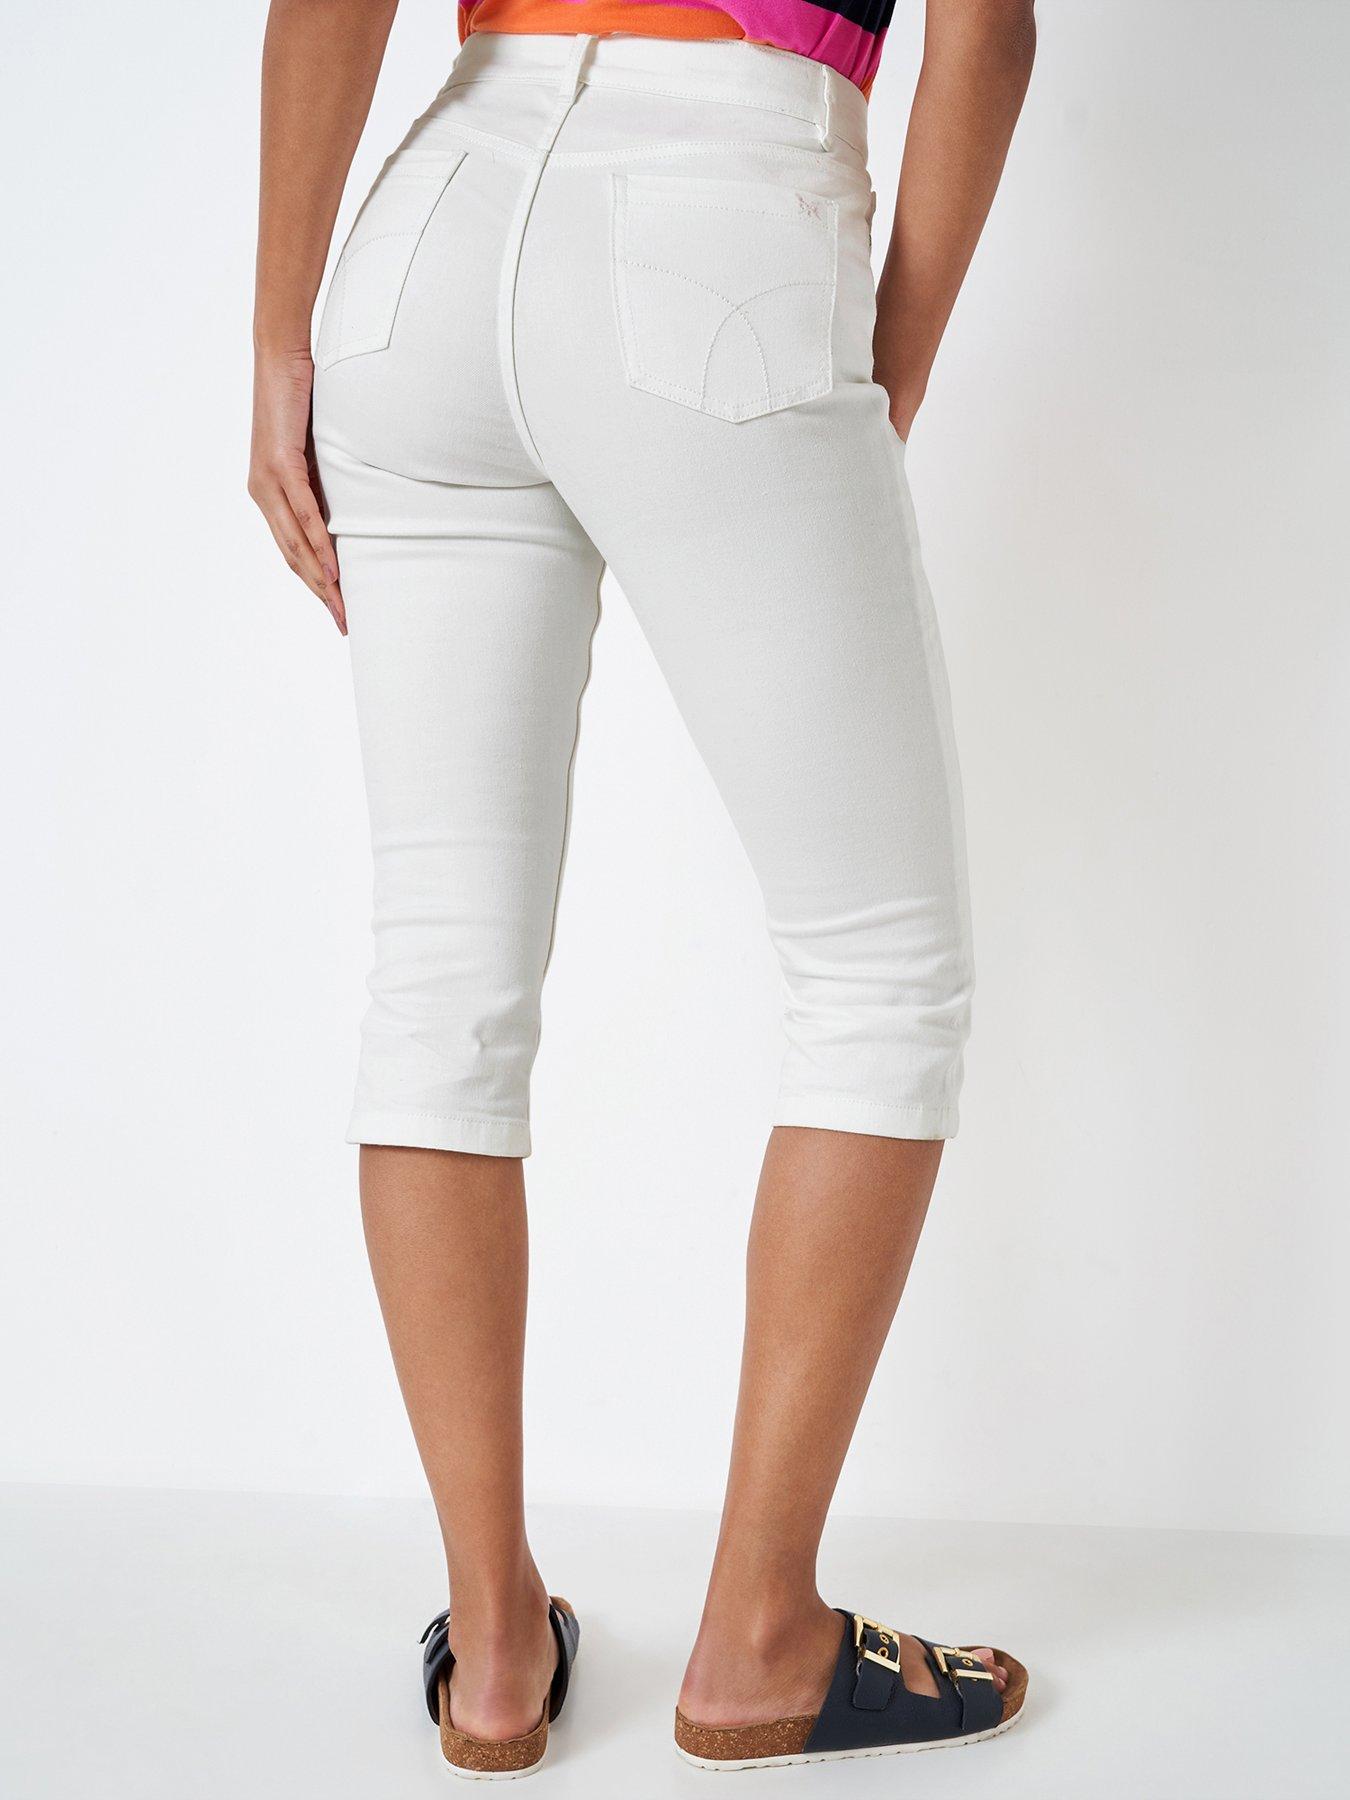 Women's Capri Trousers from Crew Clothing Company